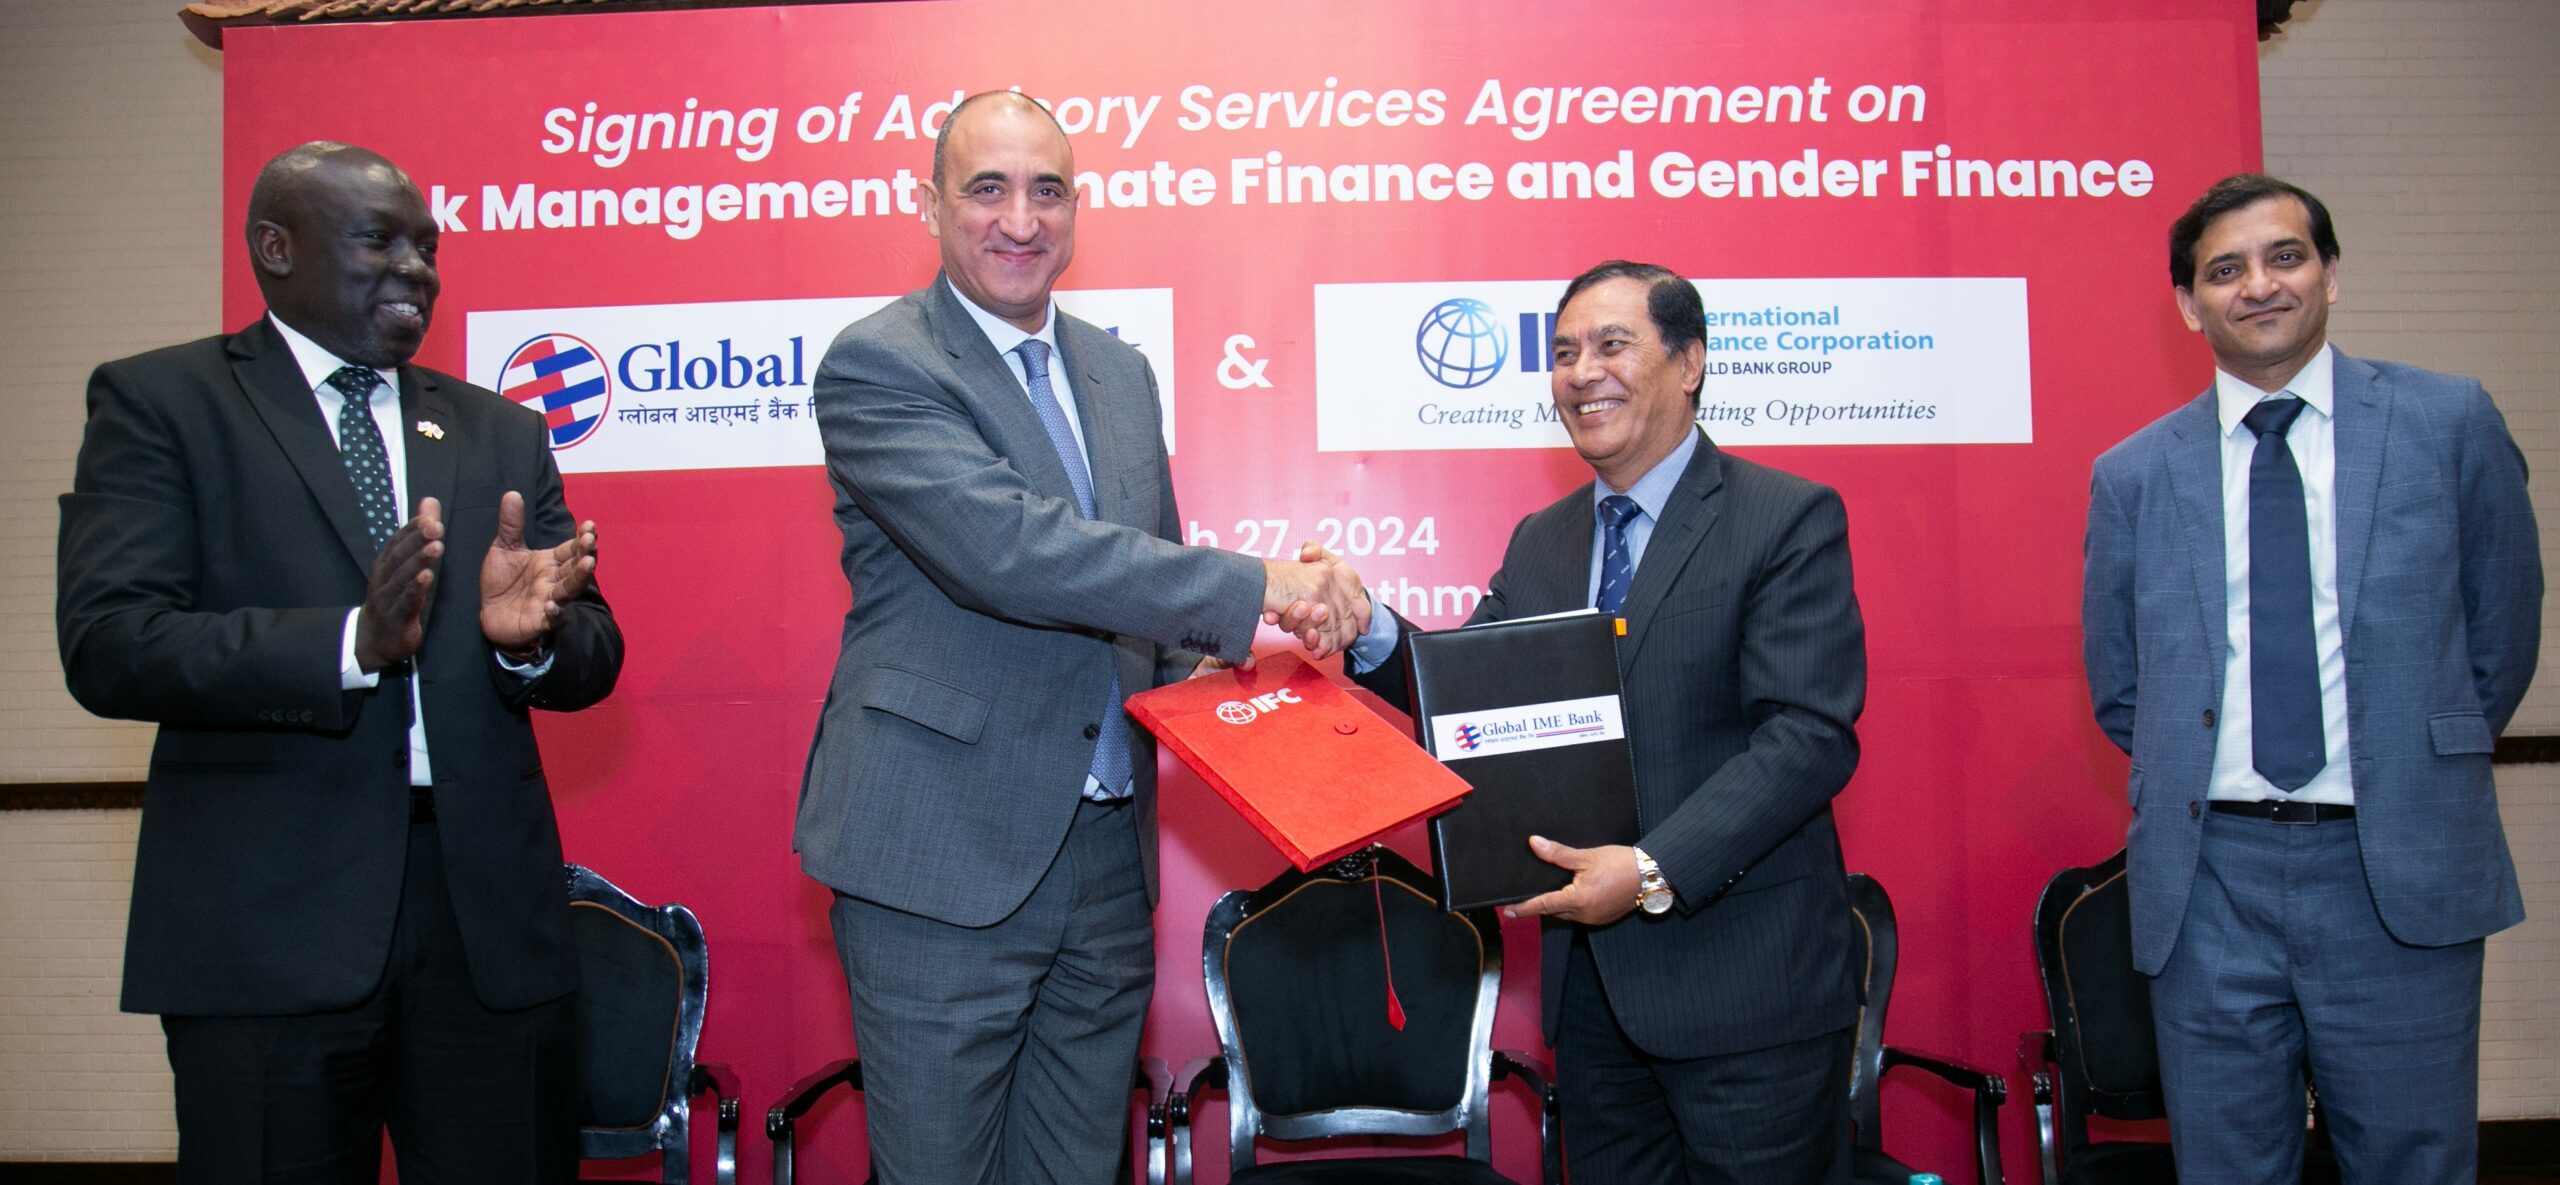 GIBL & IFC sign accord for advisory services on risk management, gender & climate finance